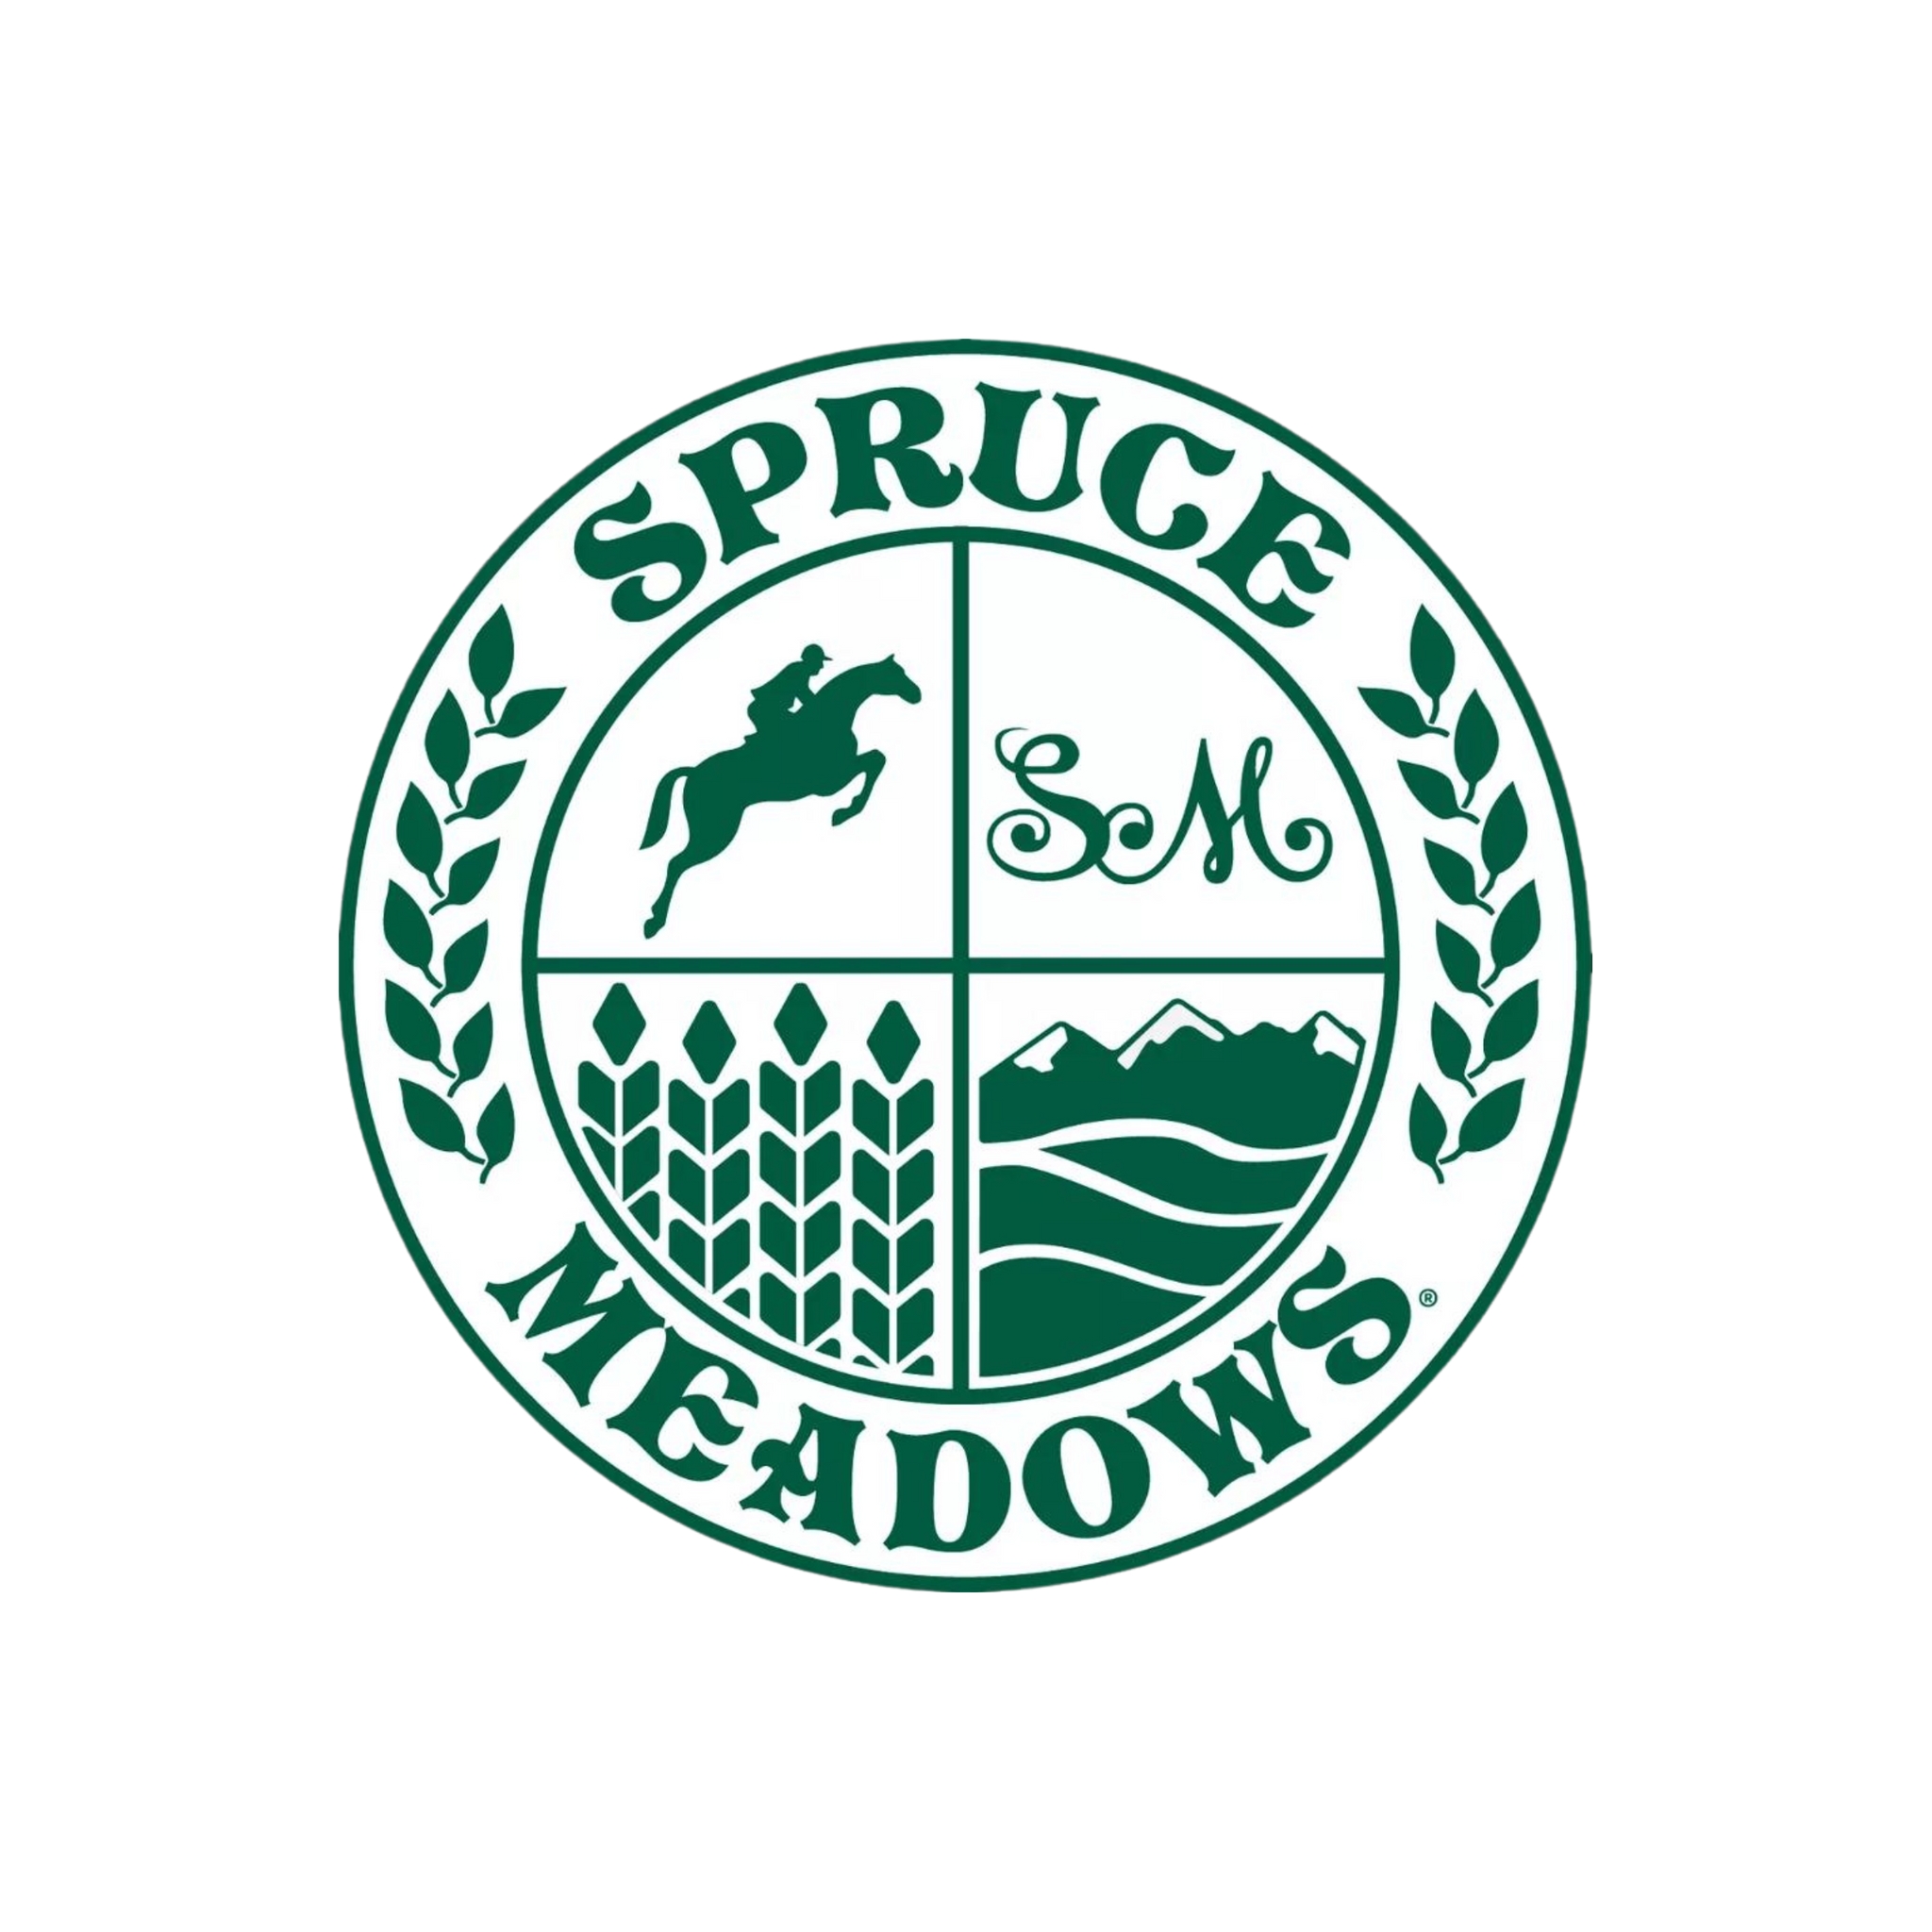 This is a logo of Spruce Meadows who hold a masters events, holiday Christmas market, and other various sporting events throughout the year in Calgary. 